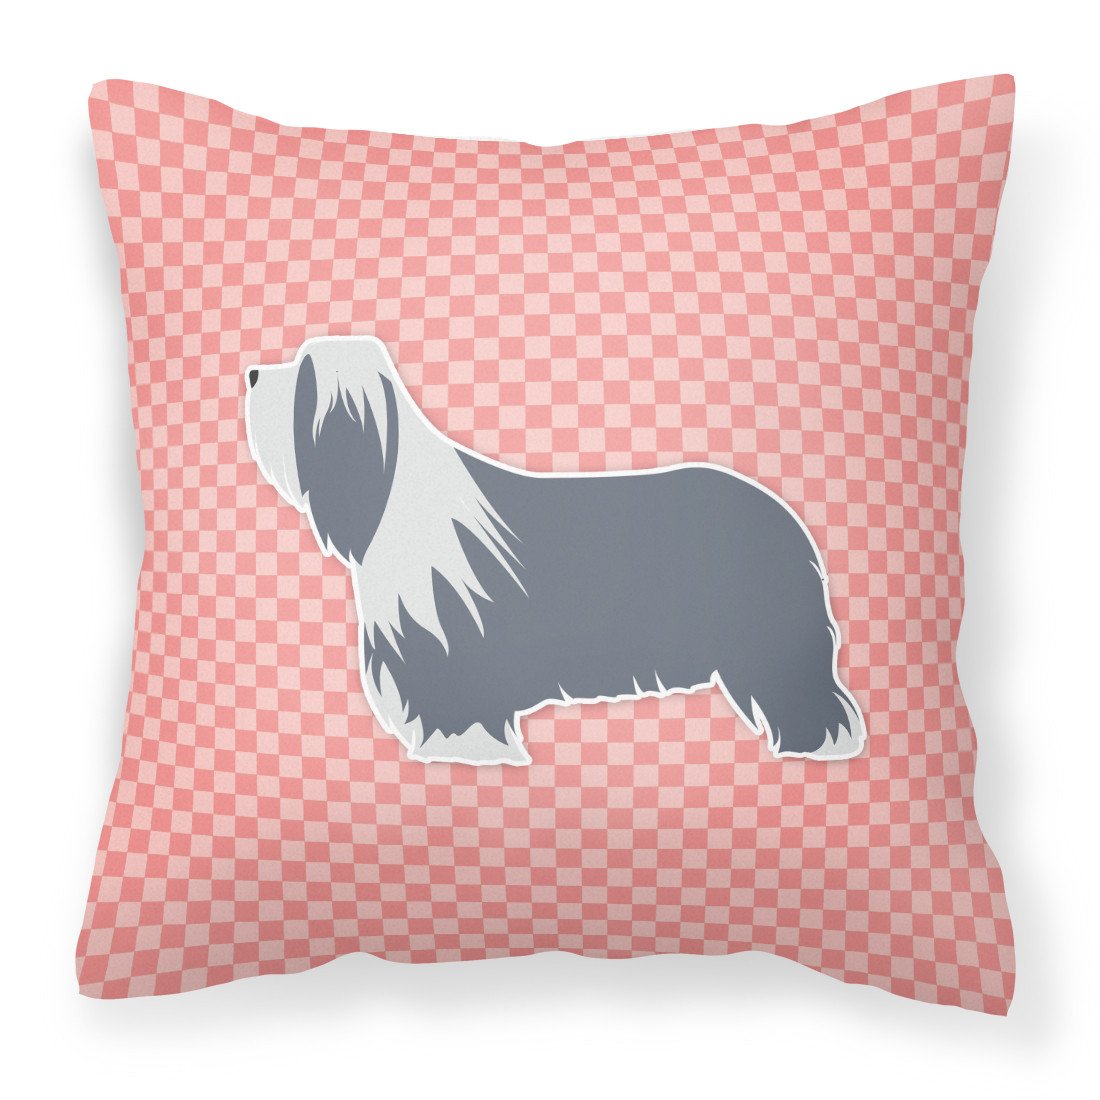 Bearded Collie Checkerboard Pink Fabric Decorative Pillow BB3617PW1818 by Caroline's Treasures